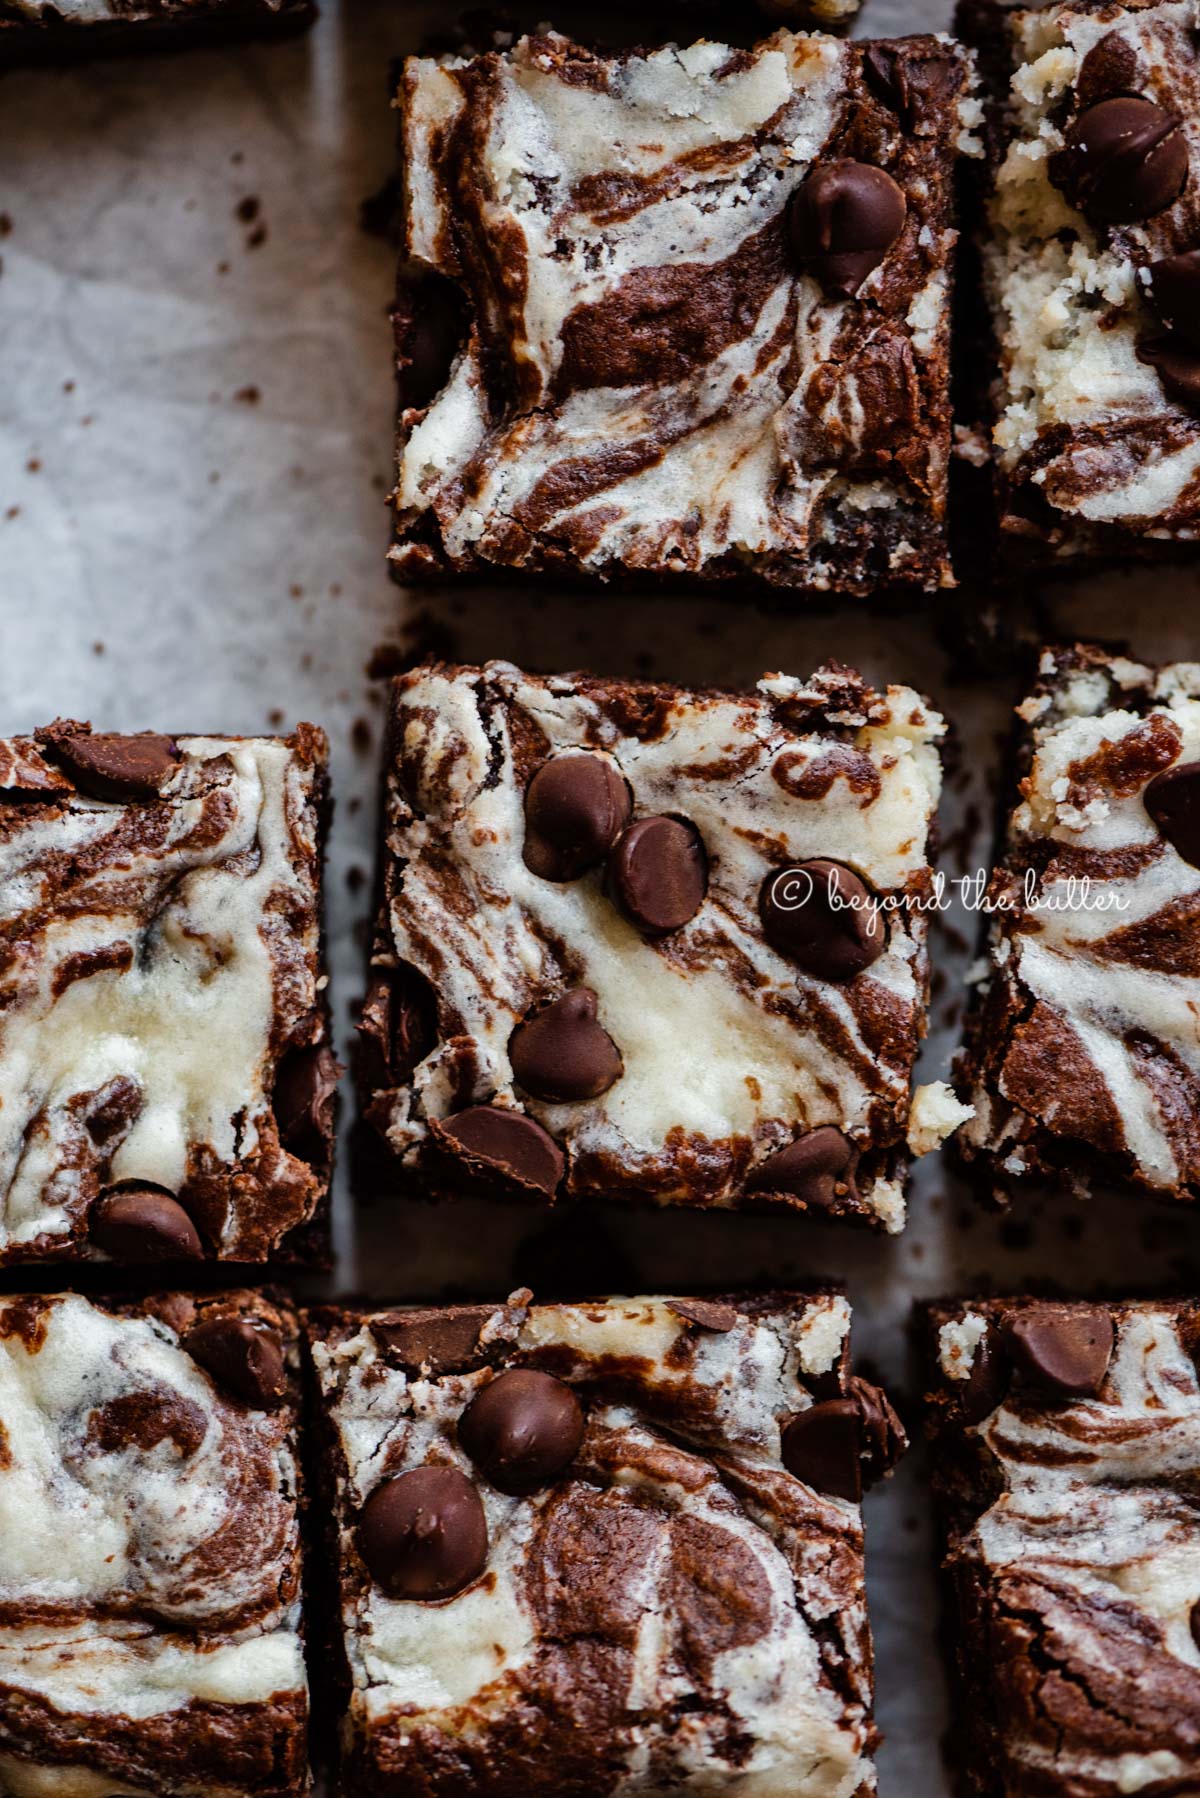 Chocolate chip cream cheese brownies on parchment paper.